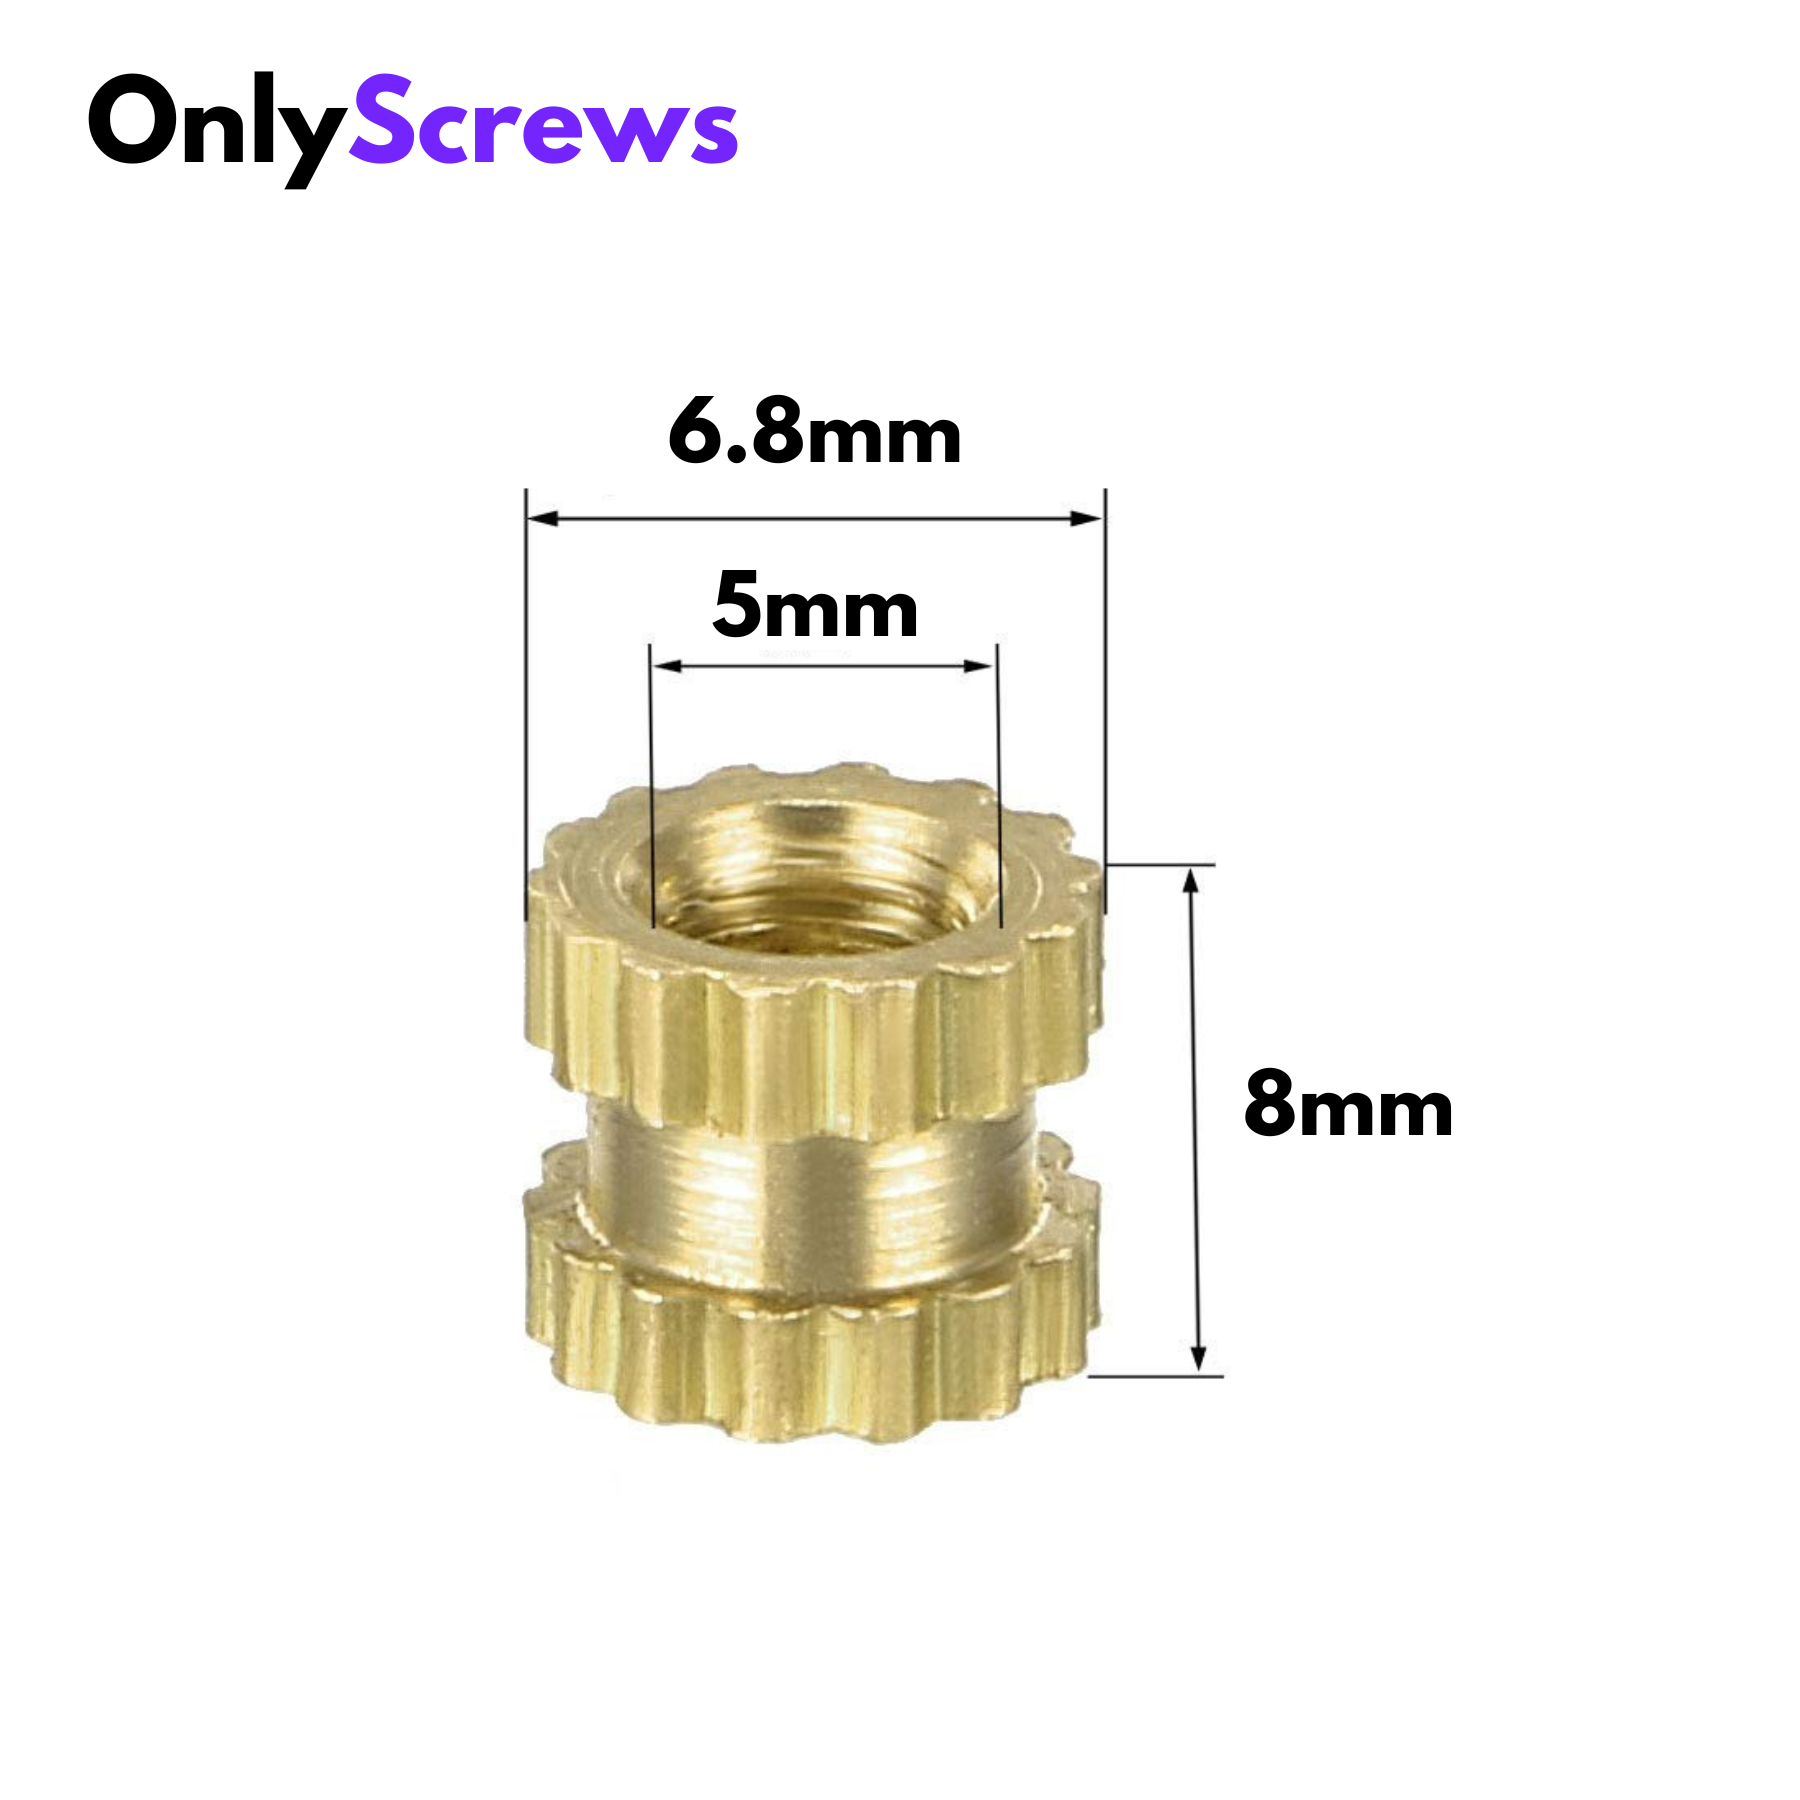 M5 X 8mm Brass threaded inserts with dimensions